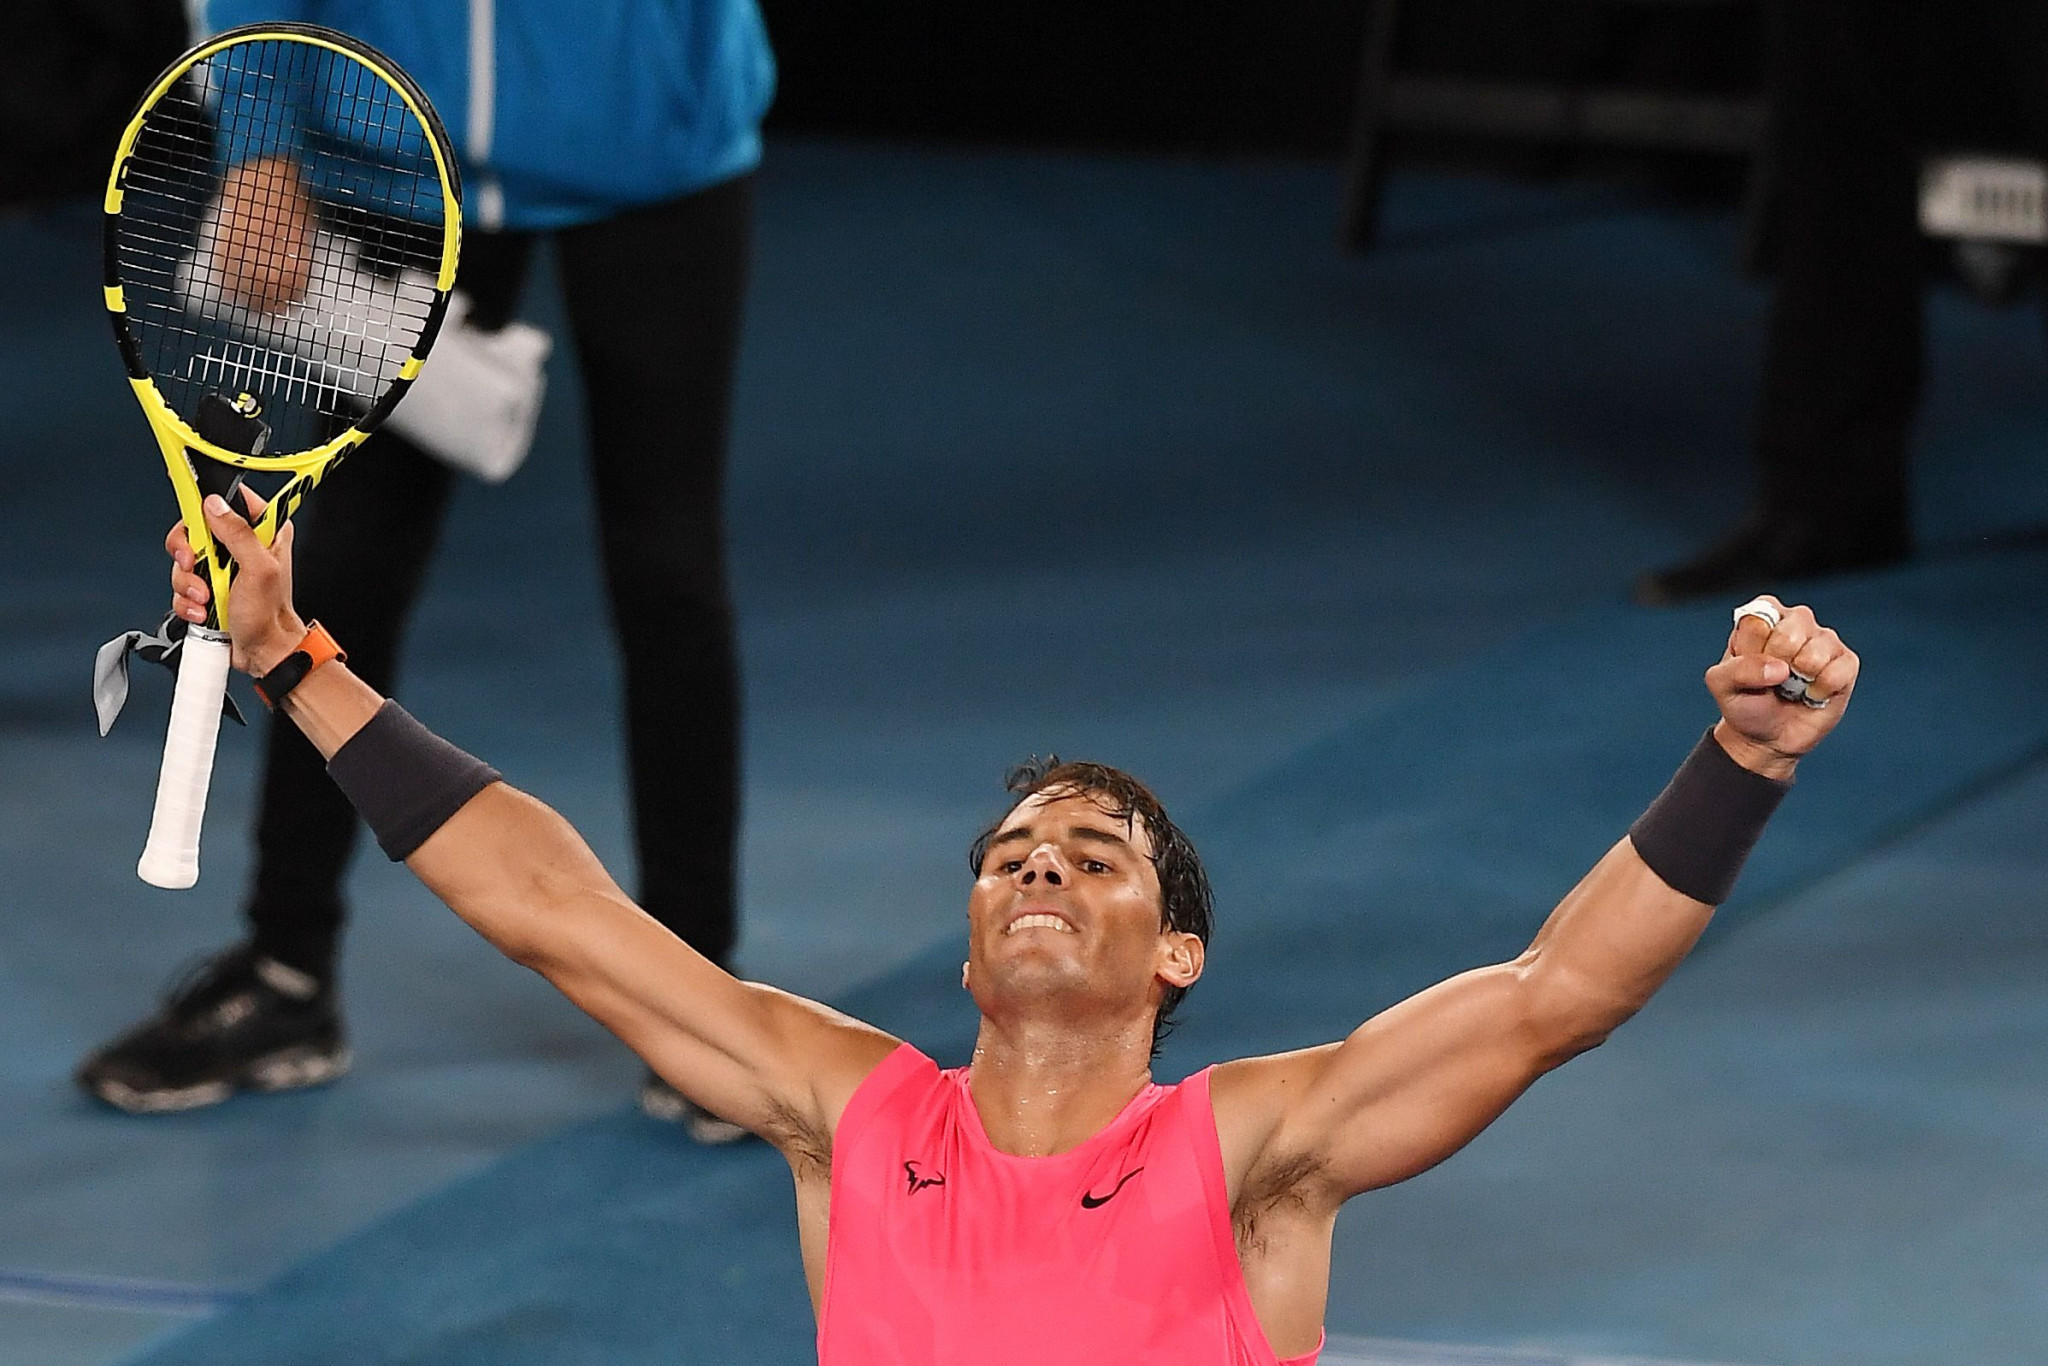 World number one Rafael Nadal knocked out rival Nick Kyrgios ©Getty Images